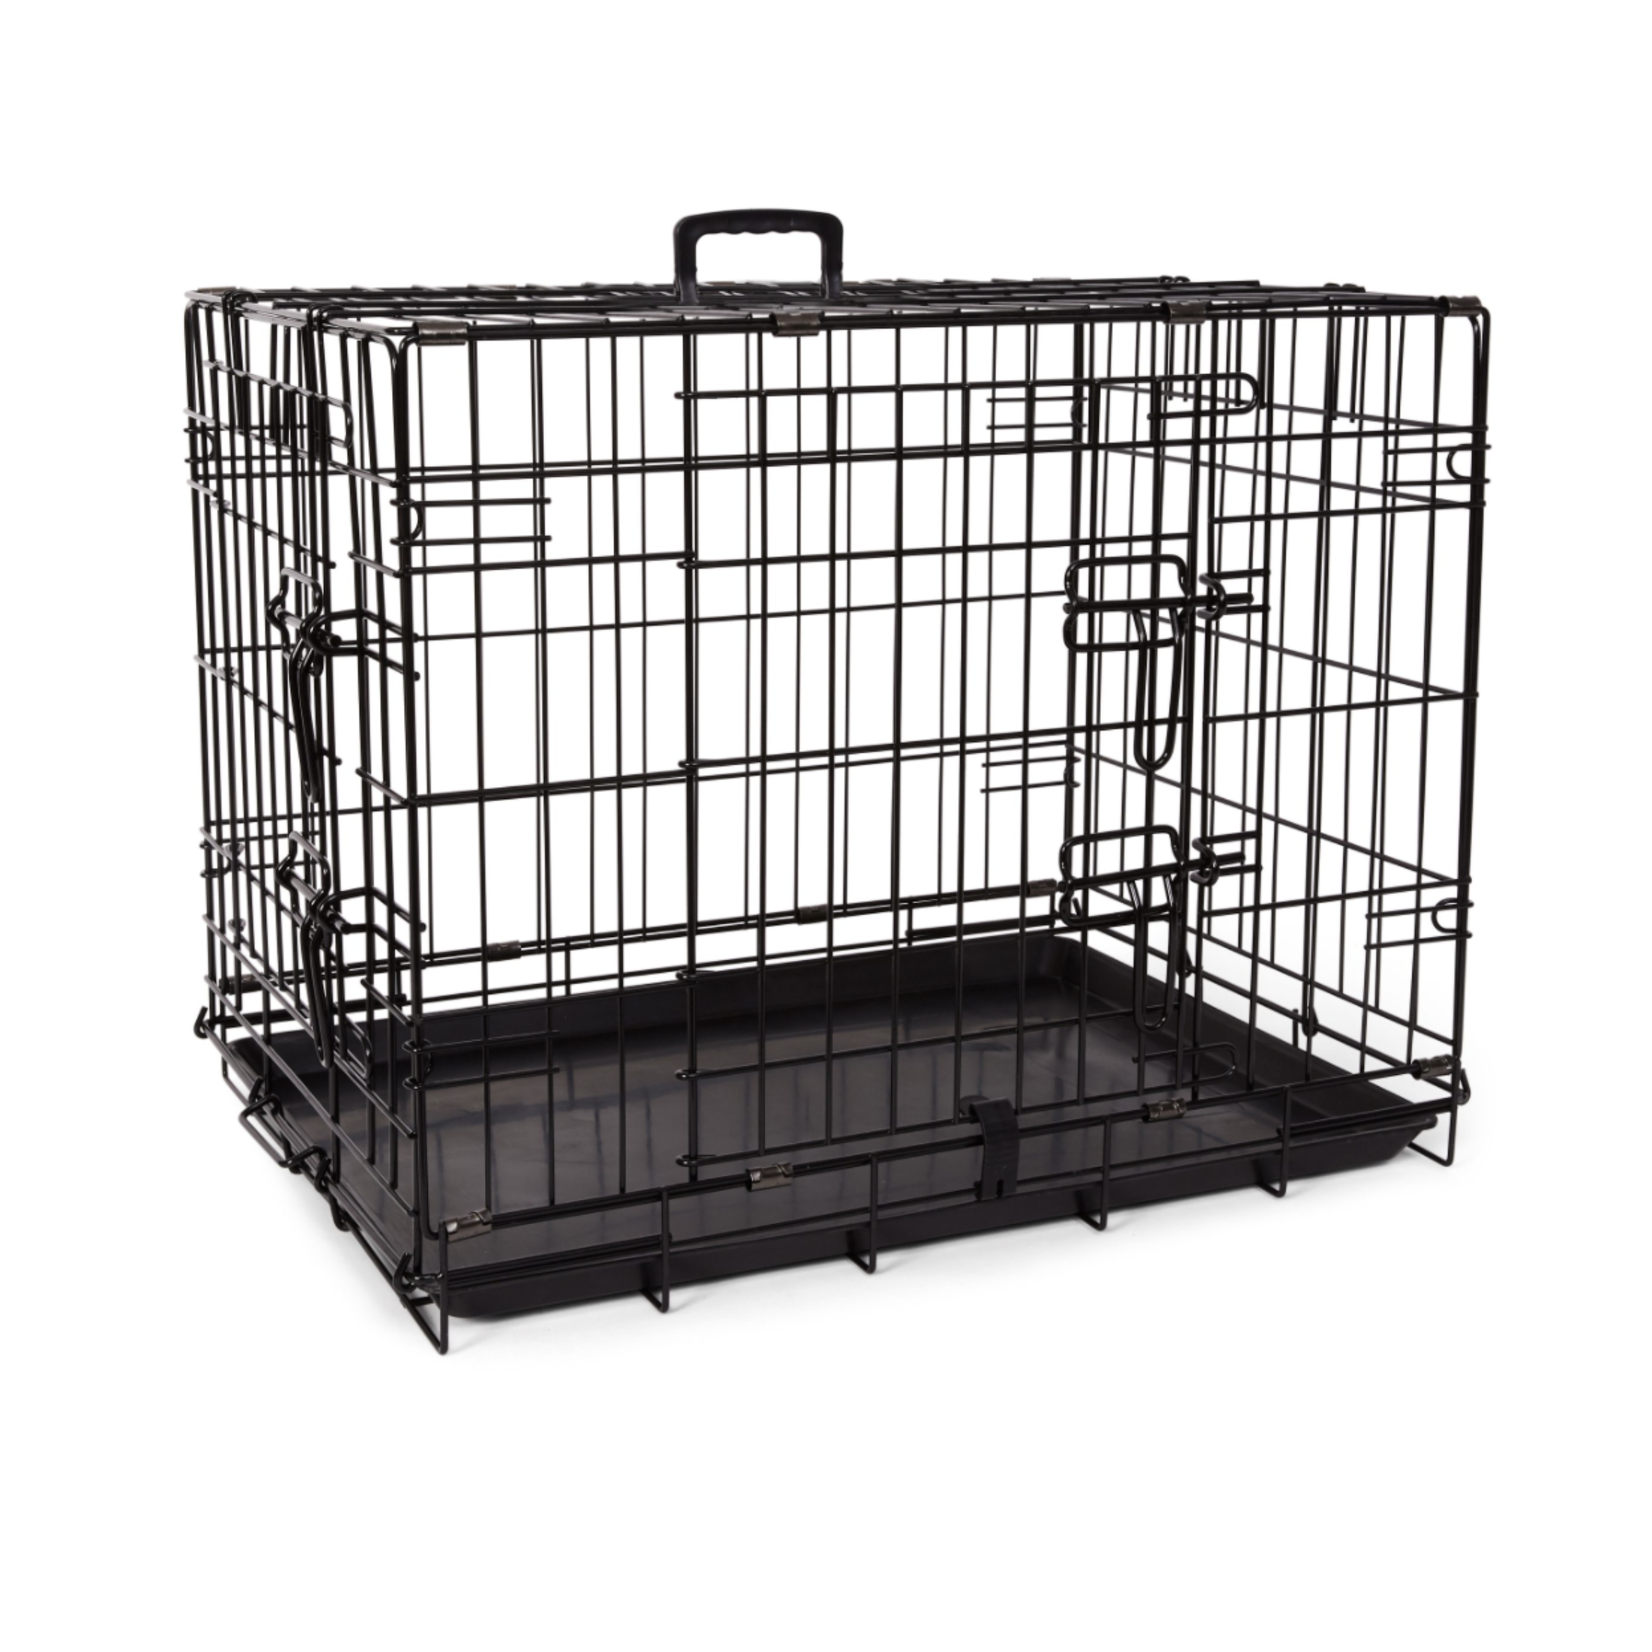 BUD-Z Bud-Z Deluxe Crate Foldable Double Doors Dog 24in